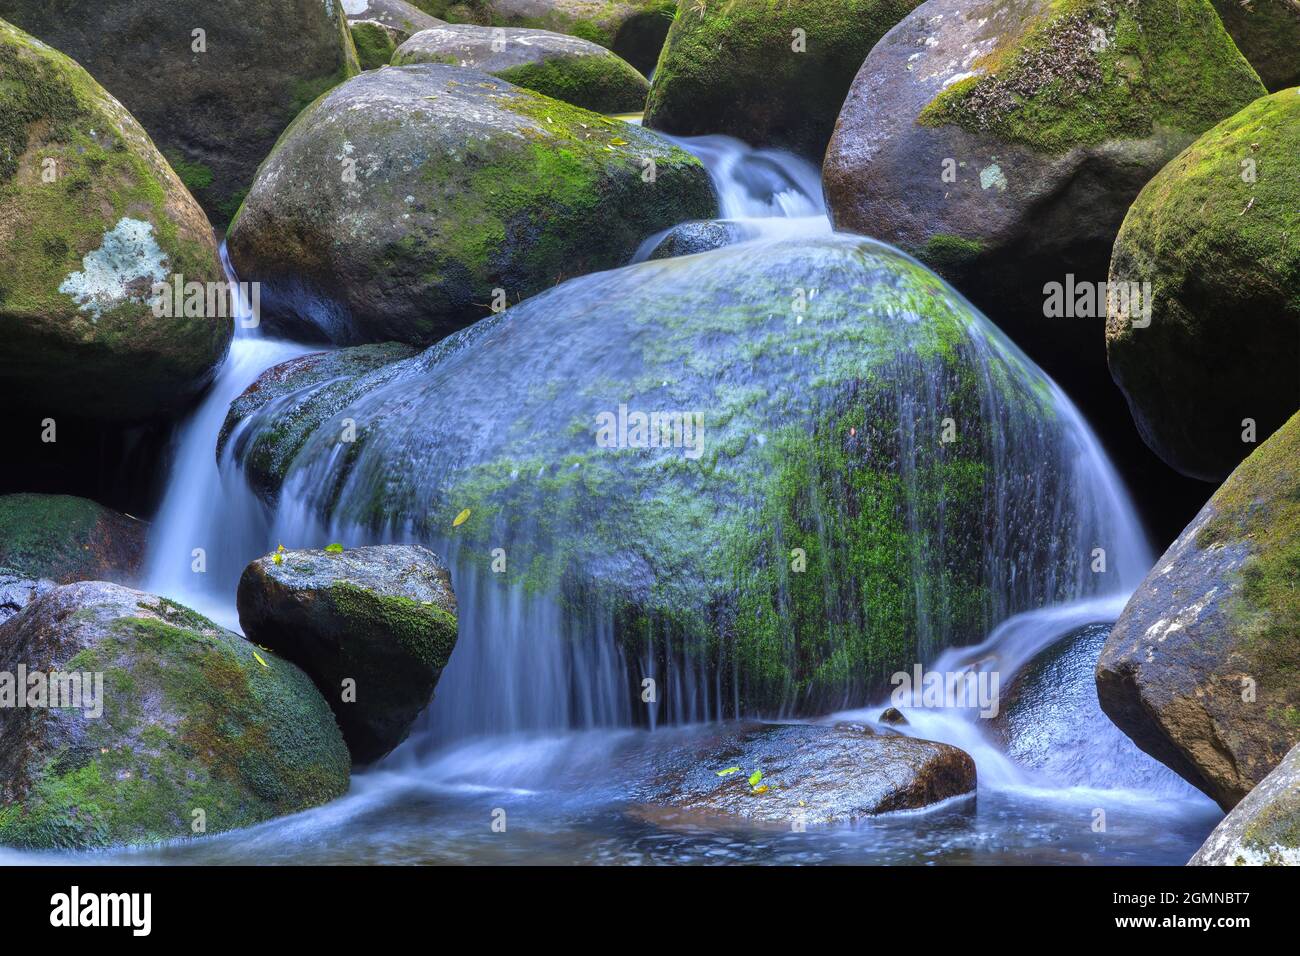 A curtain of water cascades over a mossy boulder. Photographed in the New Zealand forest Stock Photo